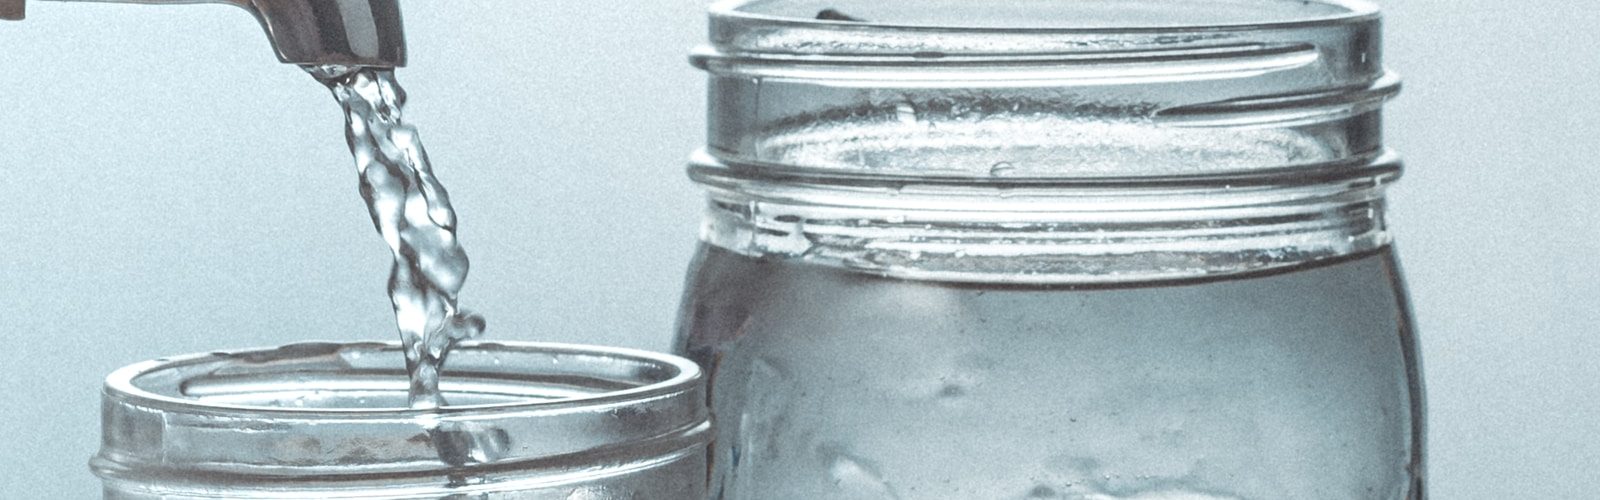 clear glass jar with water